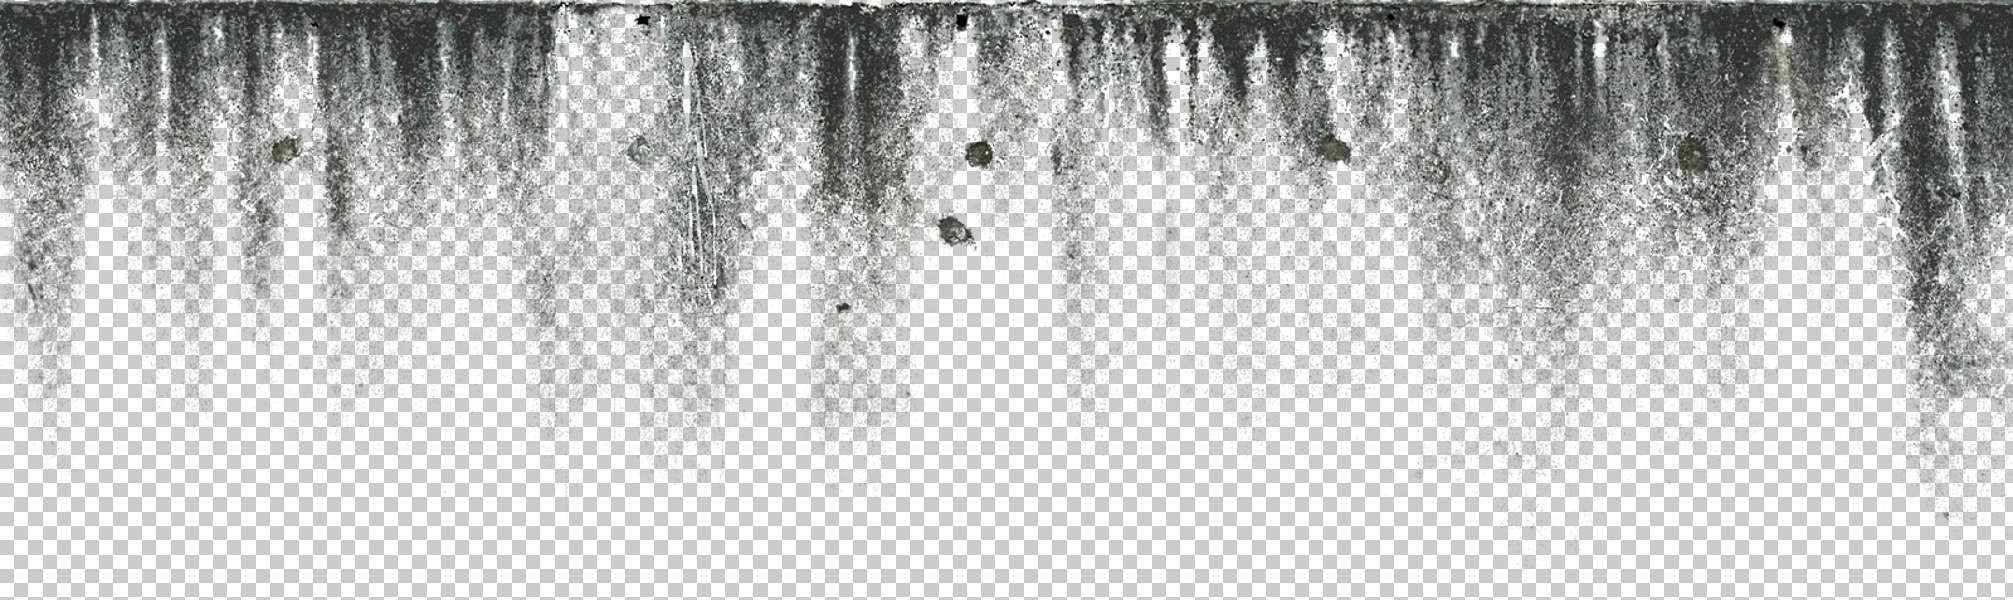 DecalsLeaking0142 - Free Background Texture - decal masked leaking leak